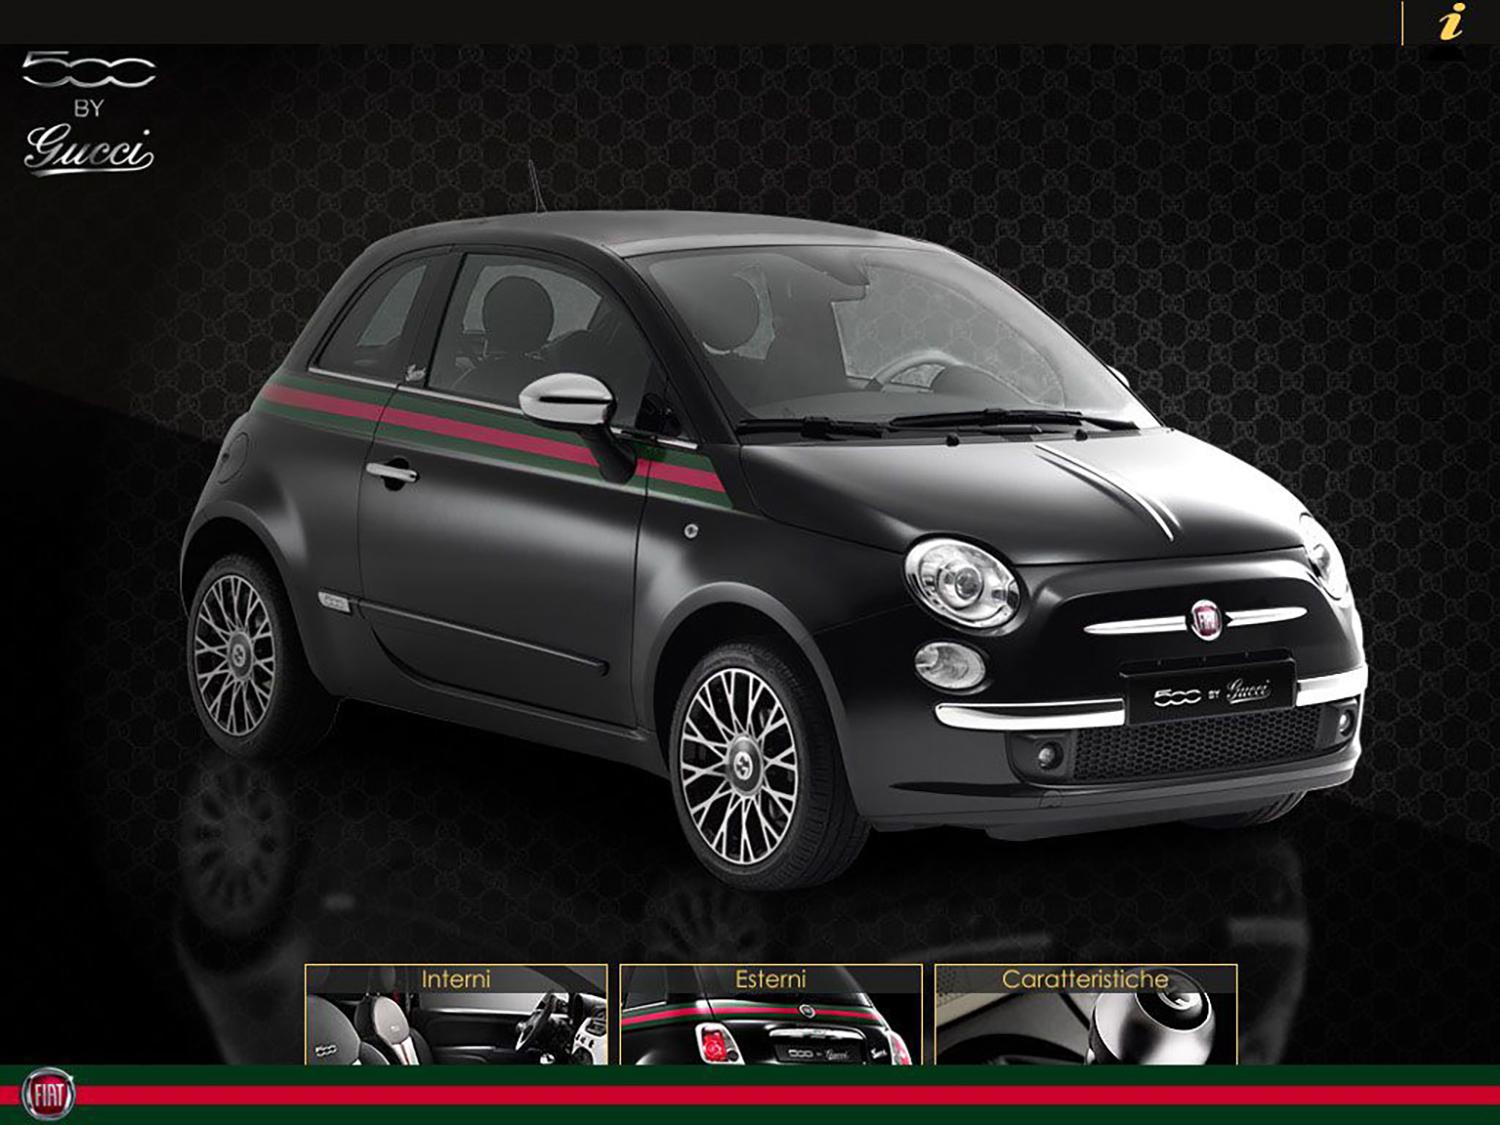 FIAT500 by Gucci